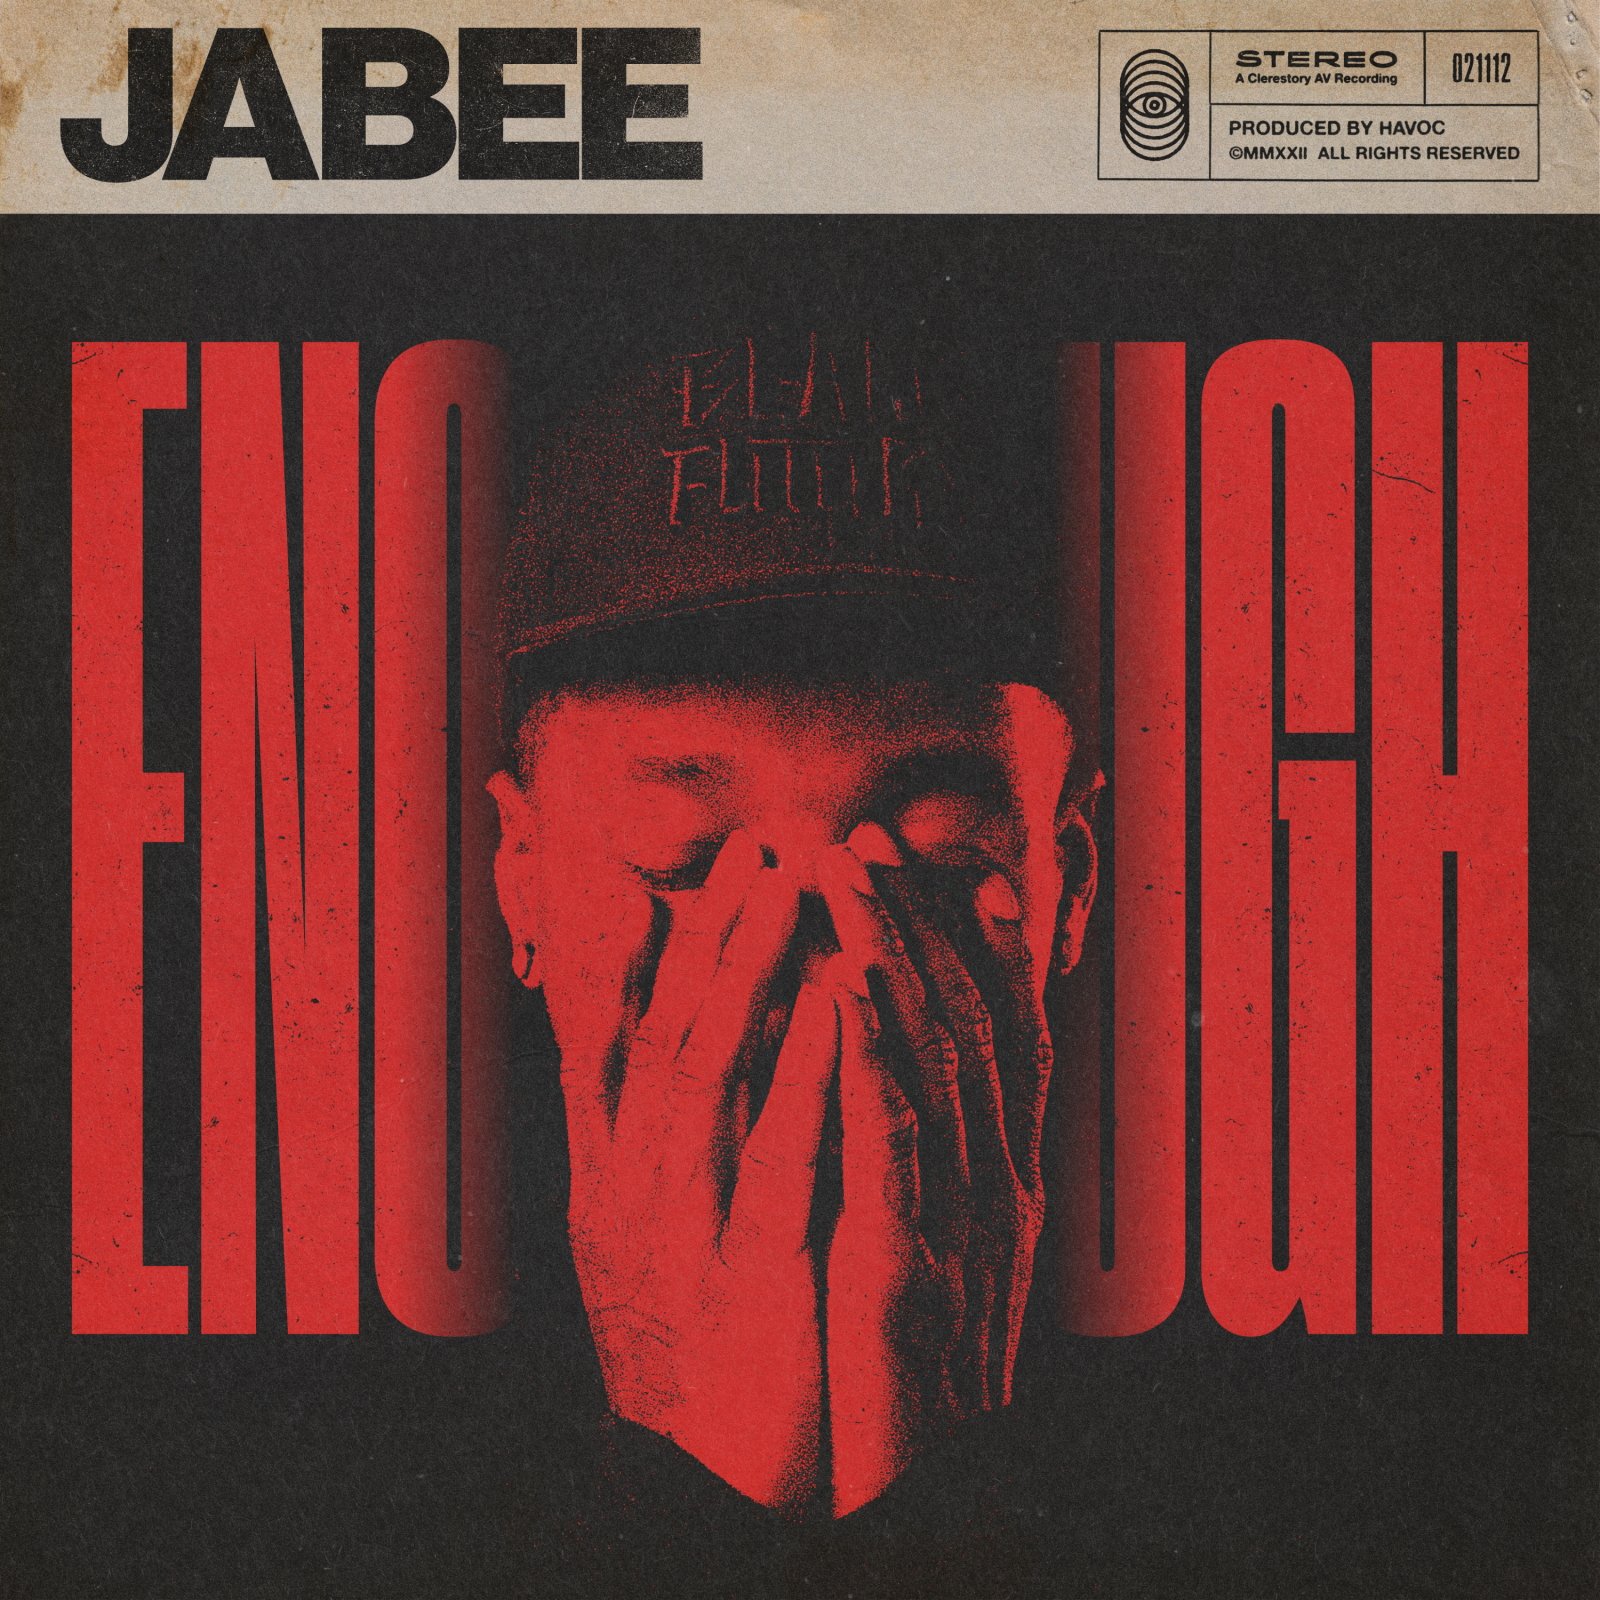 JABEE ENOUGH 1600x1600 smaller online use copy.jpg